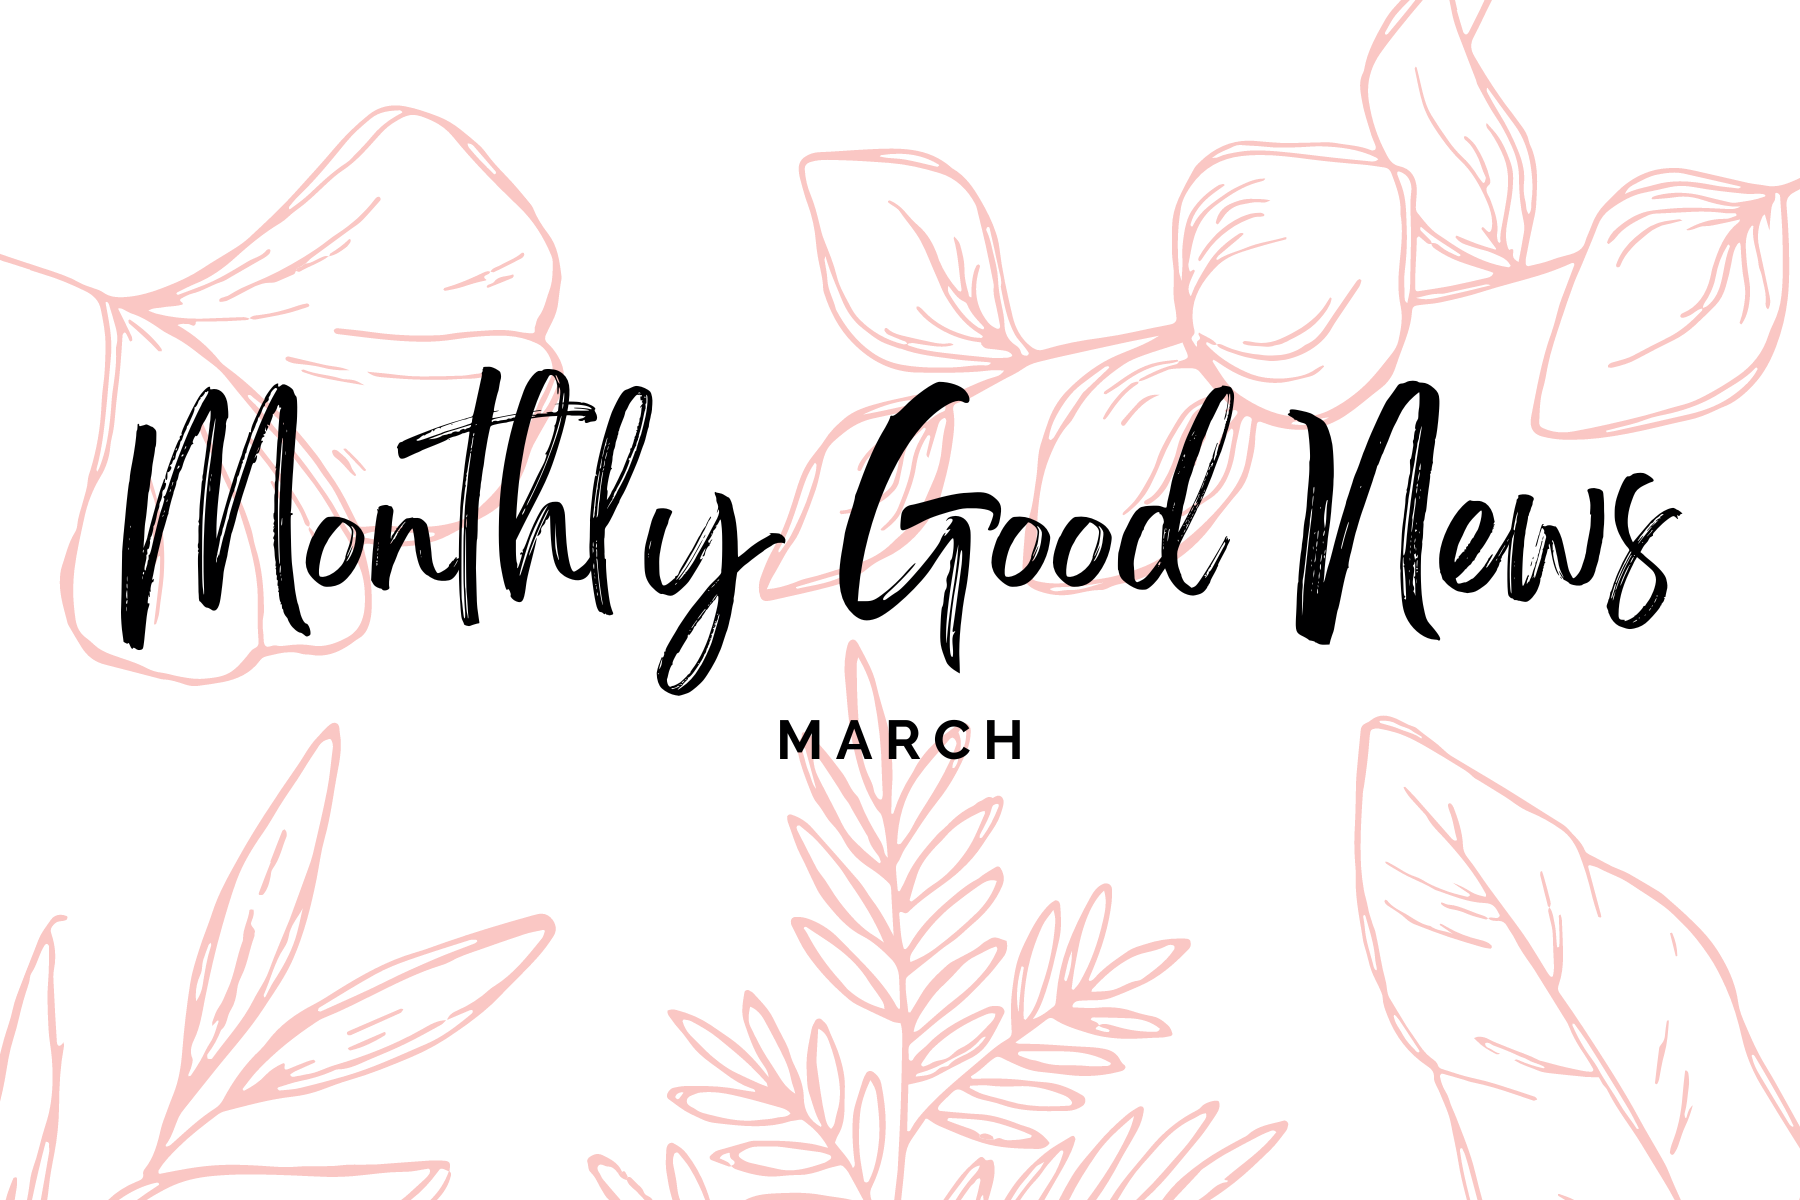 Monthly Good News #7: March